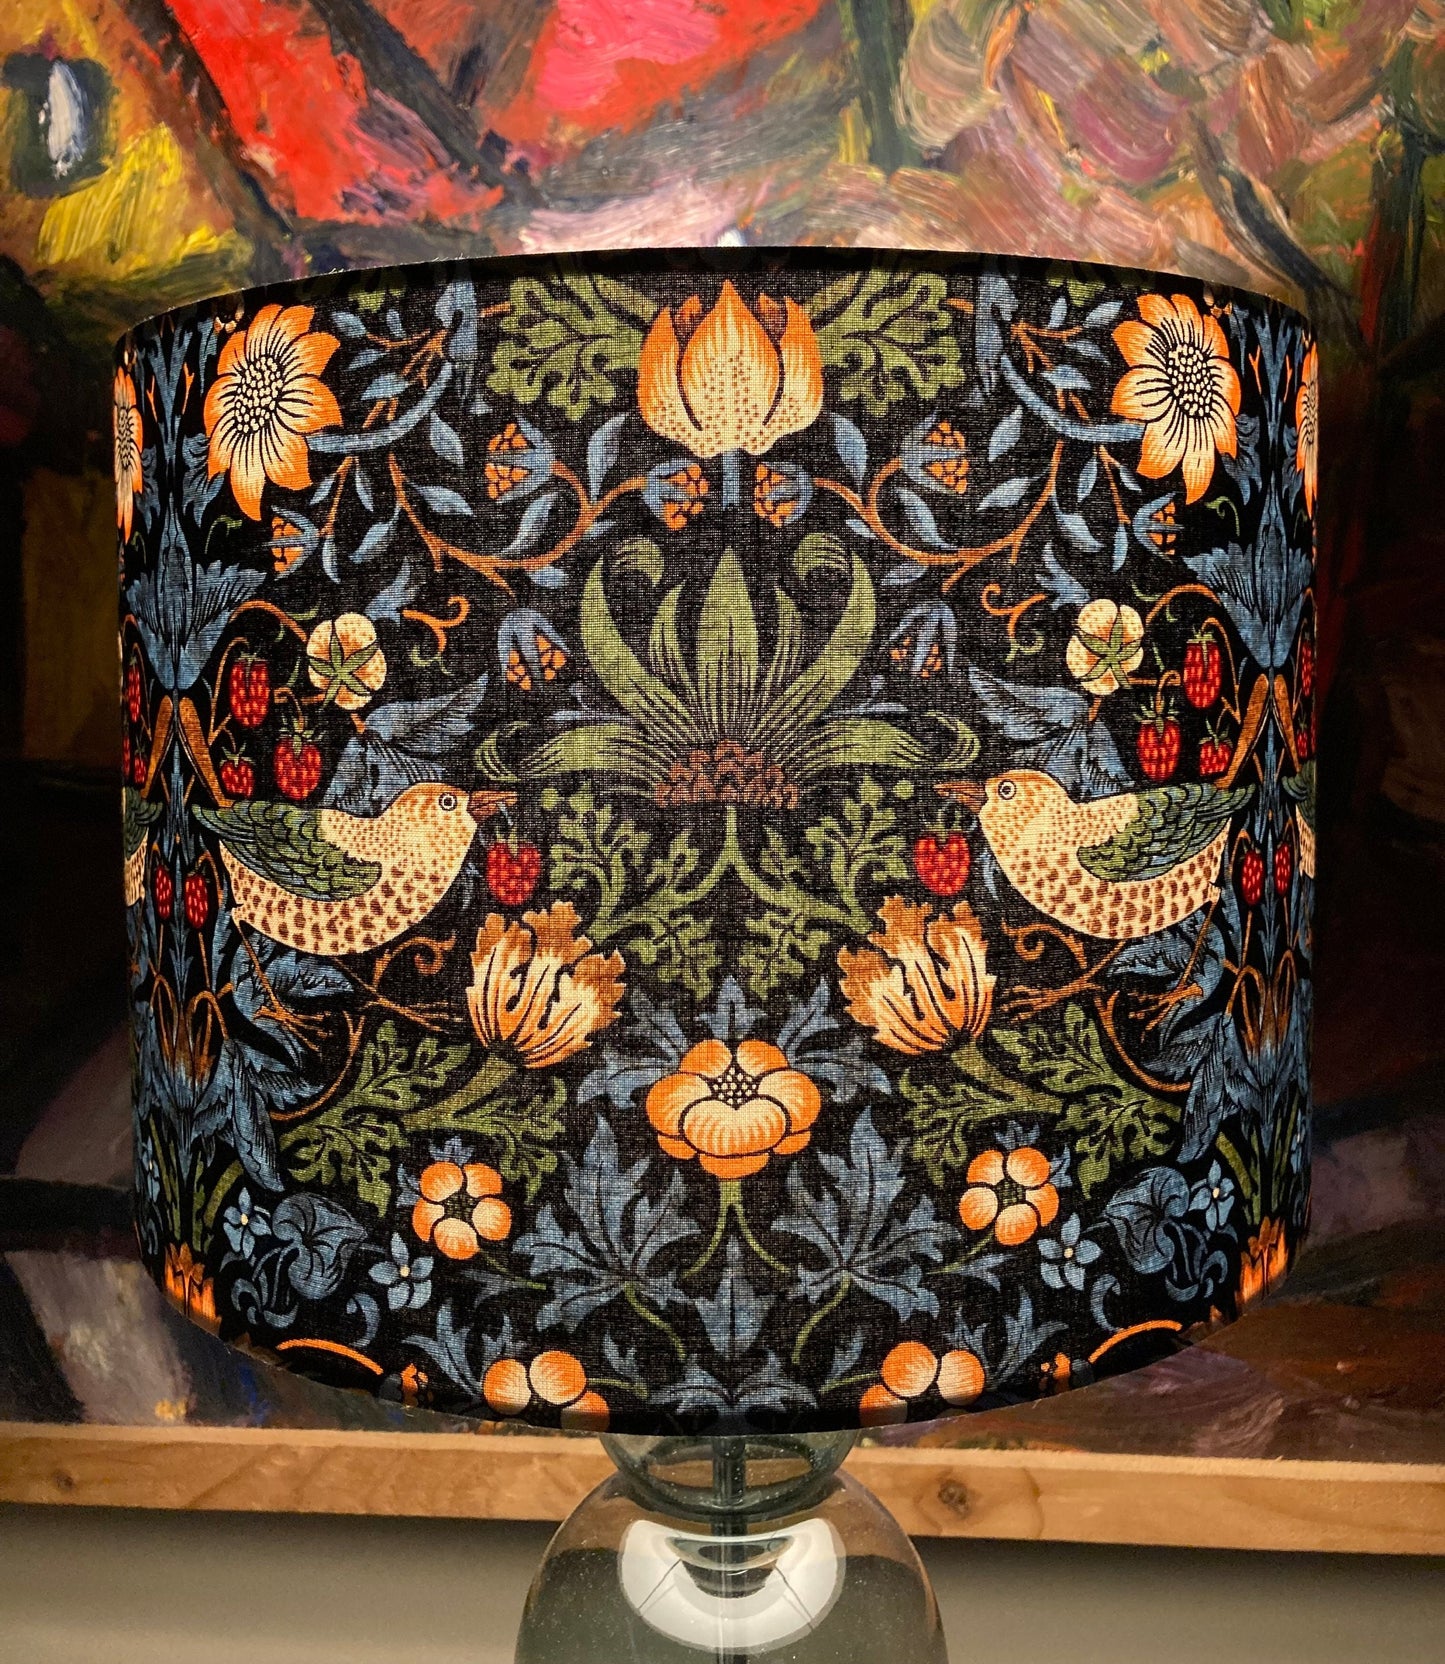 William Morris Dark Blue Strawberry Thief Lampshade for Table or Ceiling Lamps